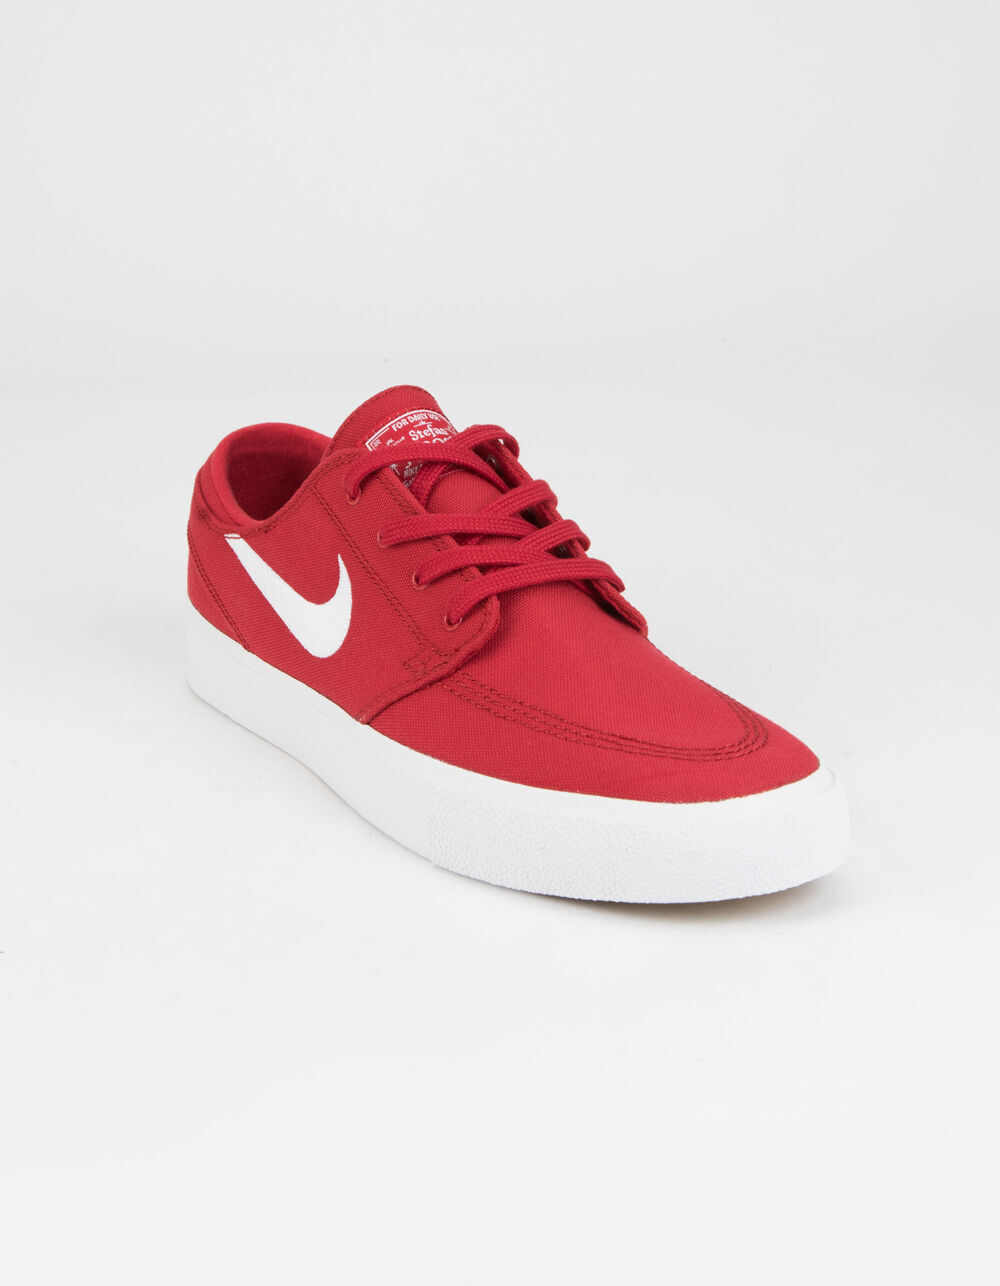 NIKE SB Zoom Stefan Janoski Canvas RM Red Shoes - RED - 360832300